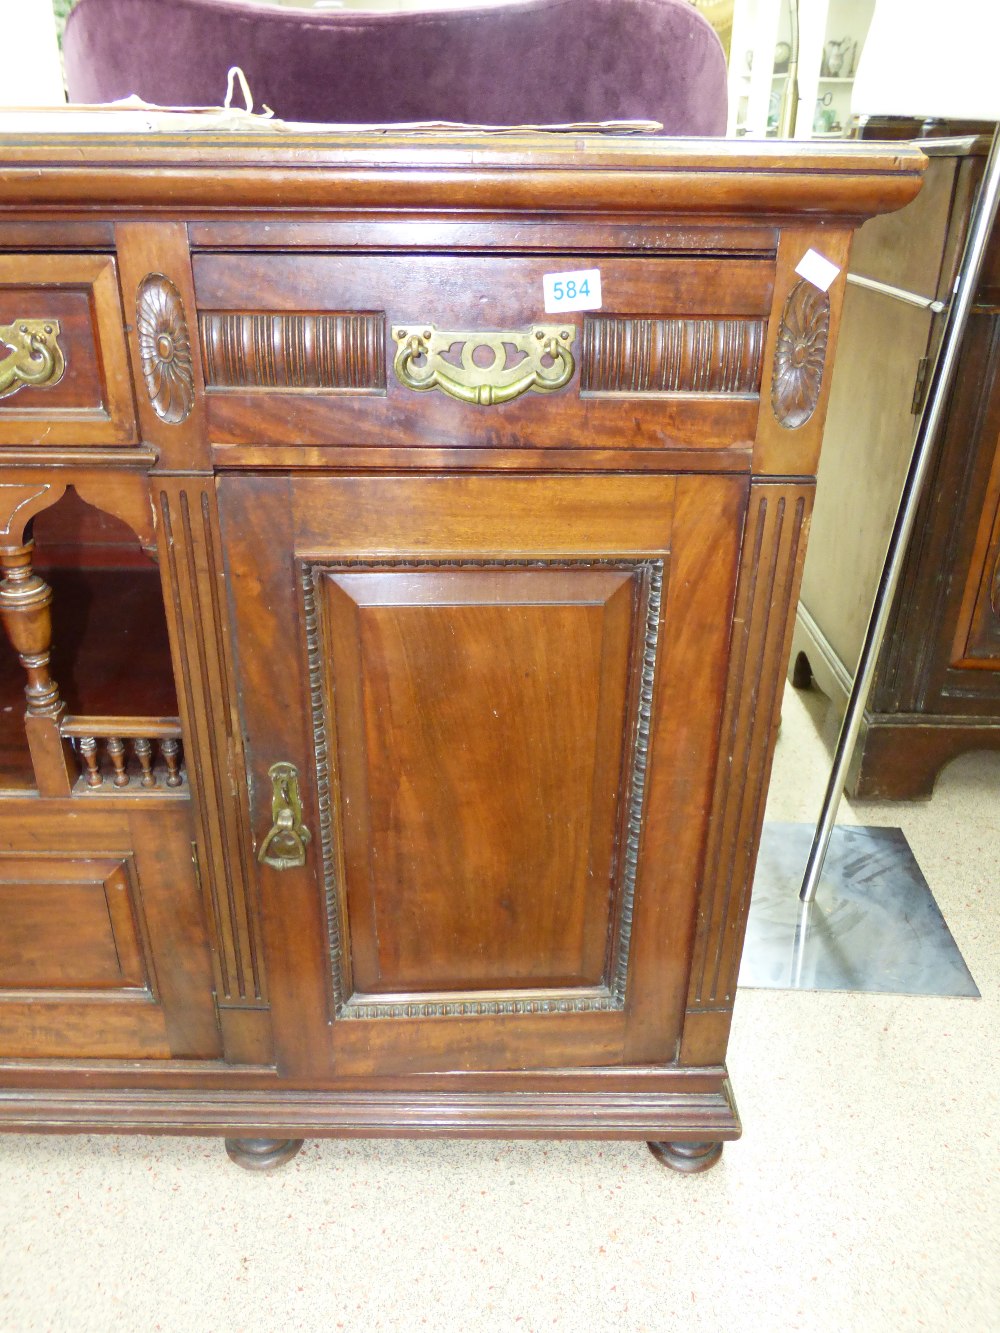 T SIMPSON & SONS HALIFAX LARGE SIDEBOARD - Image 3 of 4